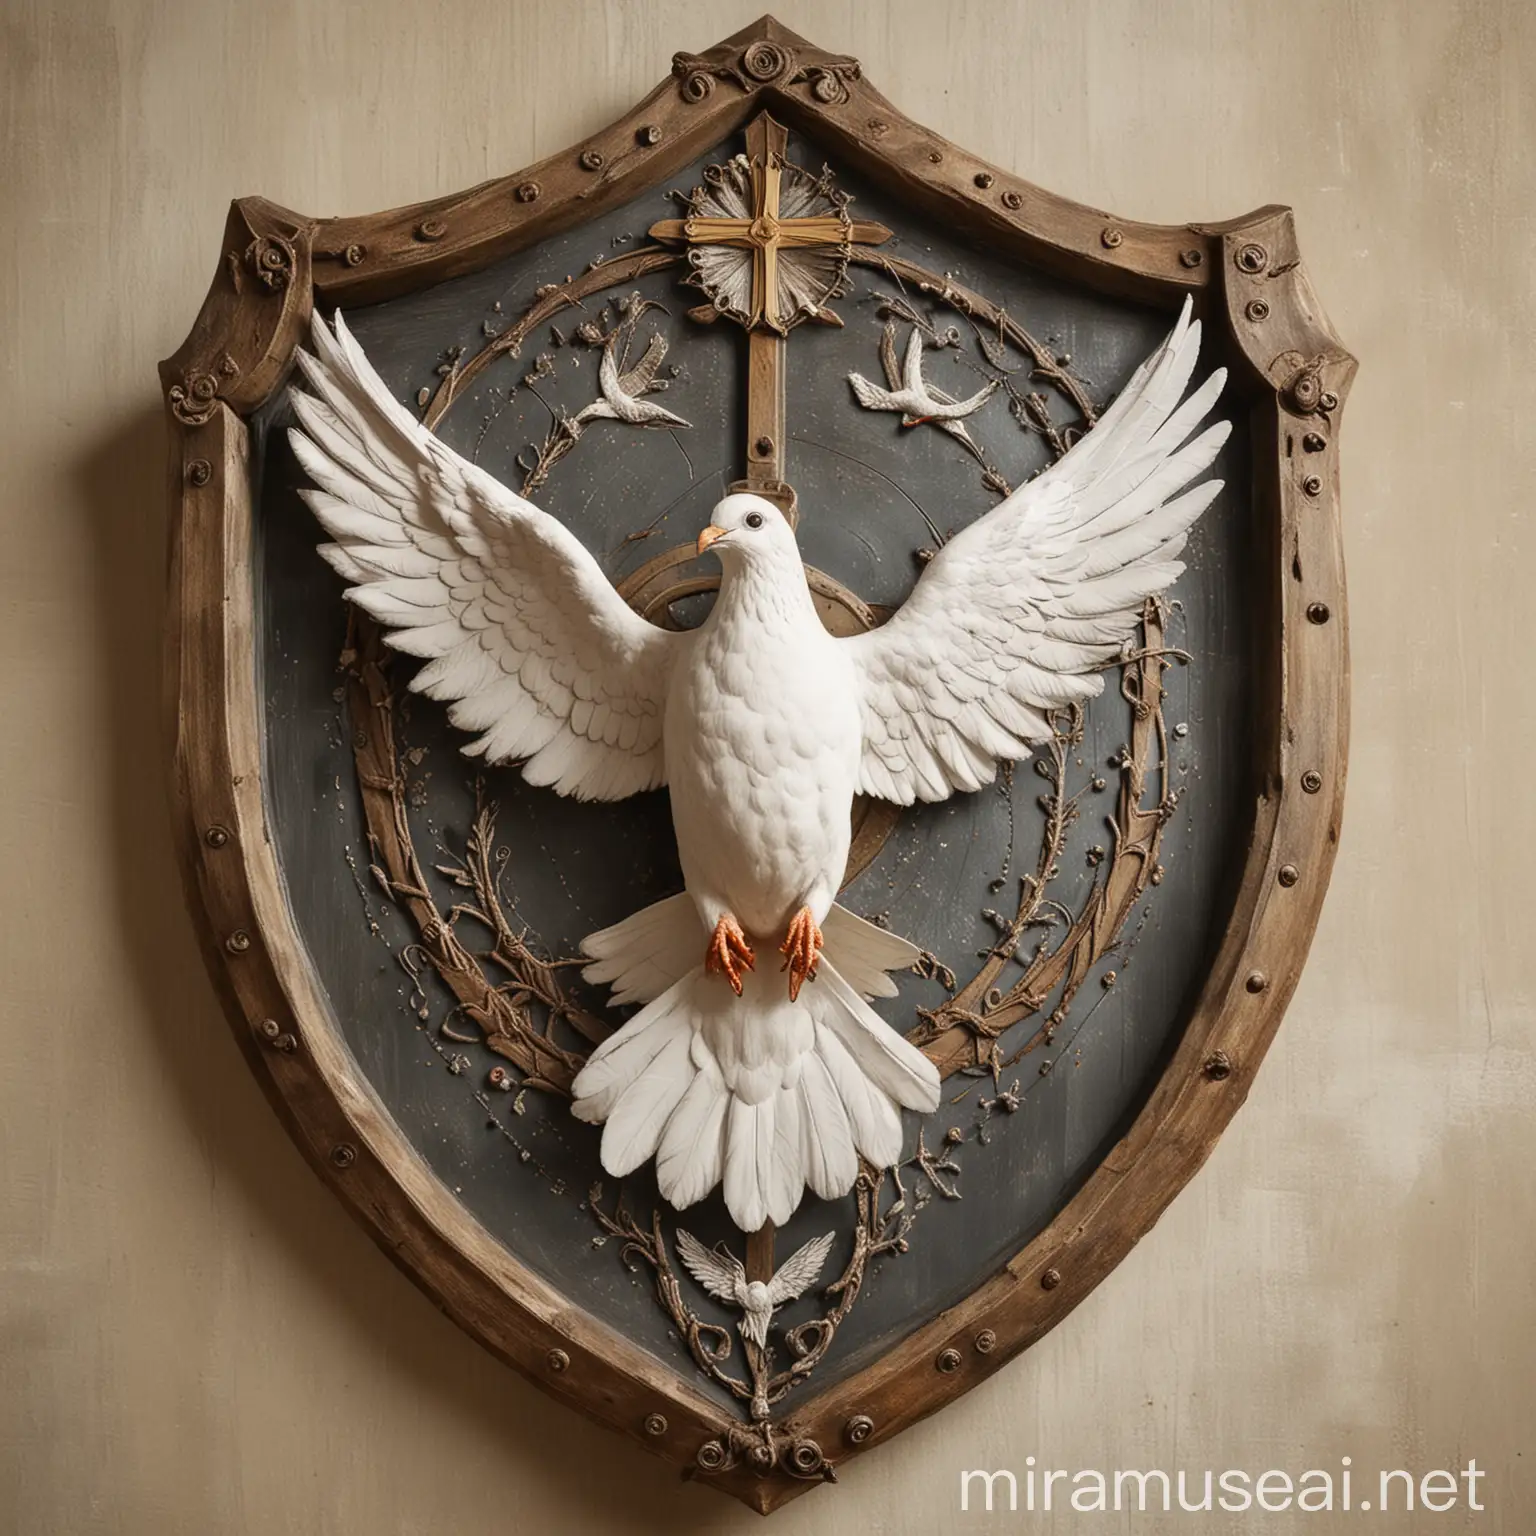 make me the family shield. The interior is empty and the shield is formed by a dove (The Holy Spirit) whose wings make the shield.